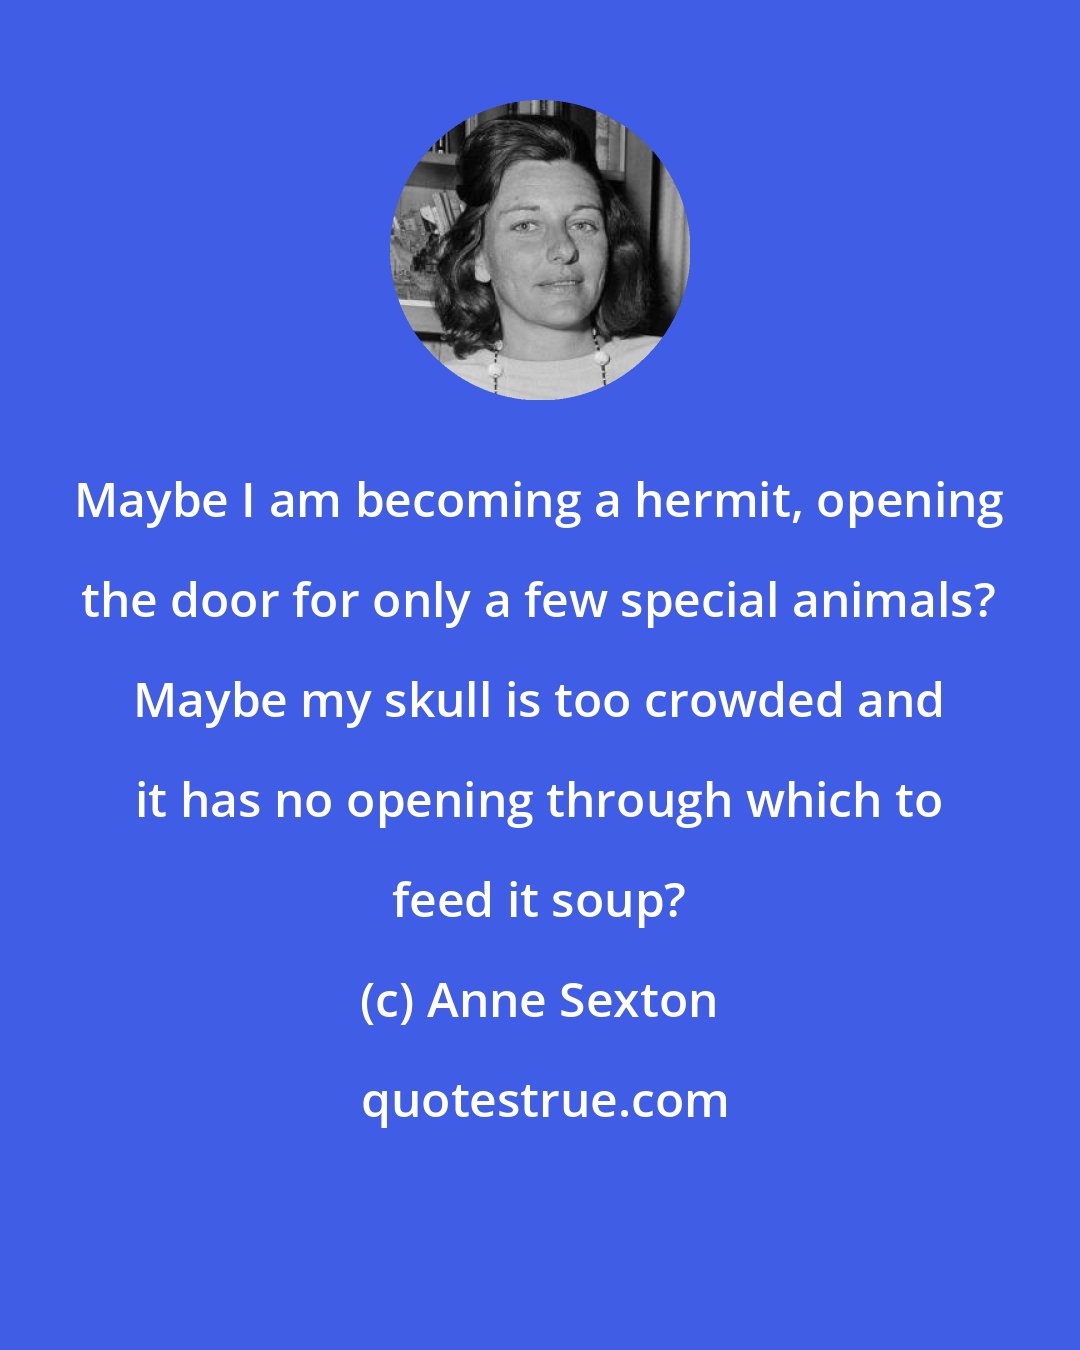 Anne Sexton: Maybe I am becoming a hermit, opening the door for only a few special animals? Maybe my skull is too crowded and it has no opening through which to feed it soup?